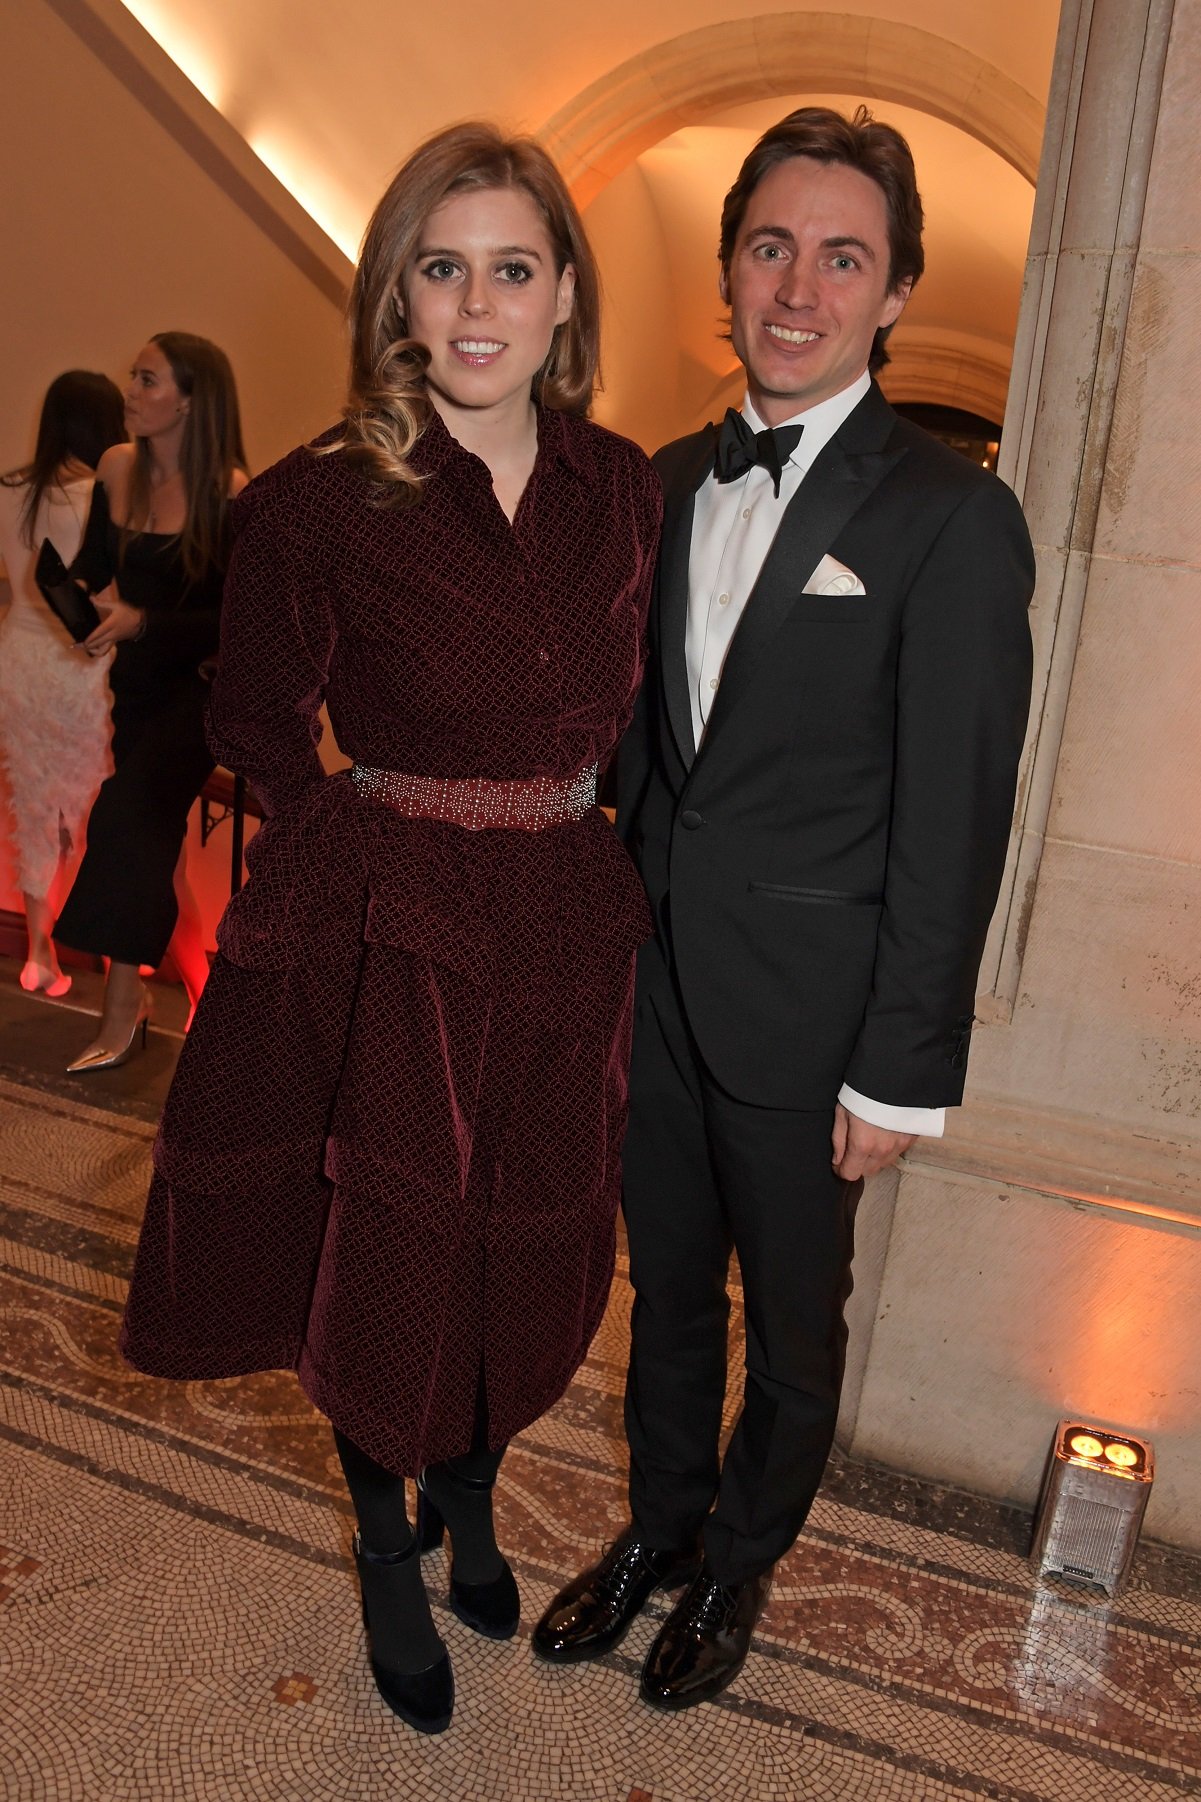 Princess Beatrice in a burgundy dress and Edoardo Mapelli Mozzi in a tuxedo pose for a photo at The Portrait Gala